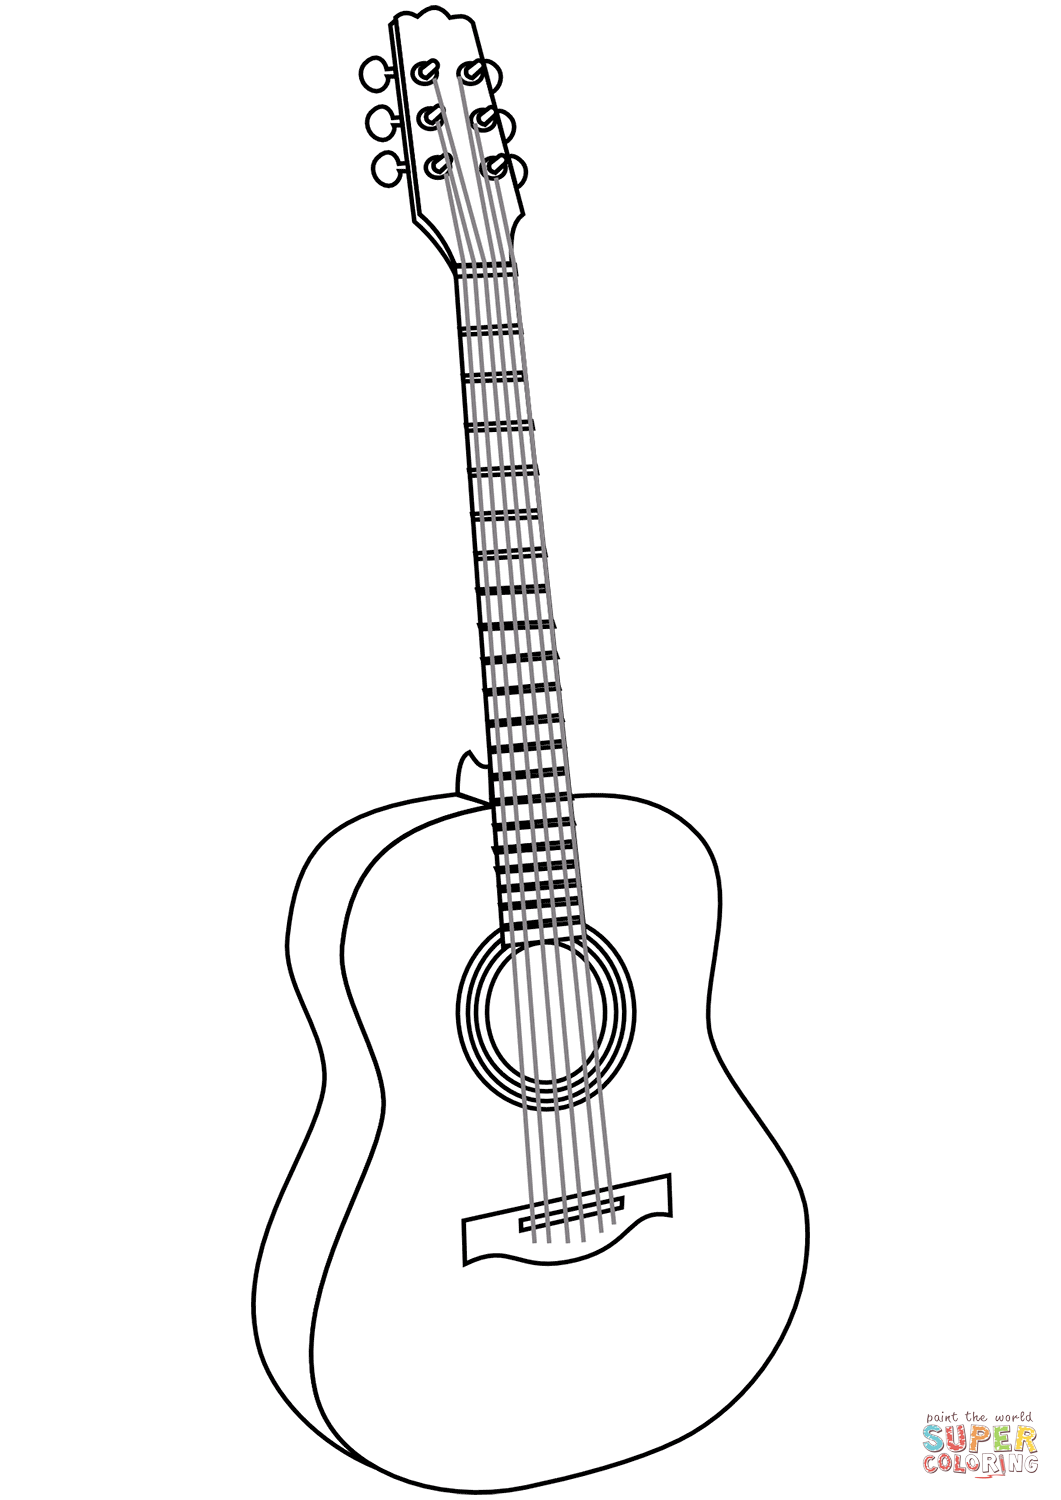 Guitar coloring page free printable coloring pages guitar drawing coloring pages music drawings